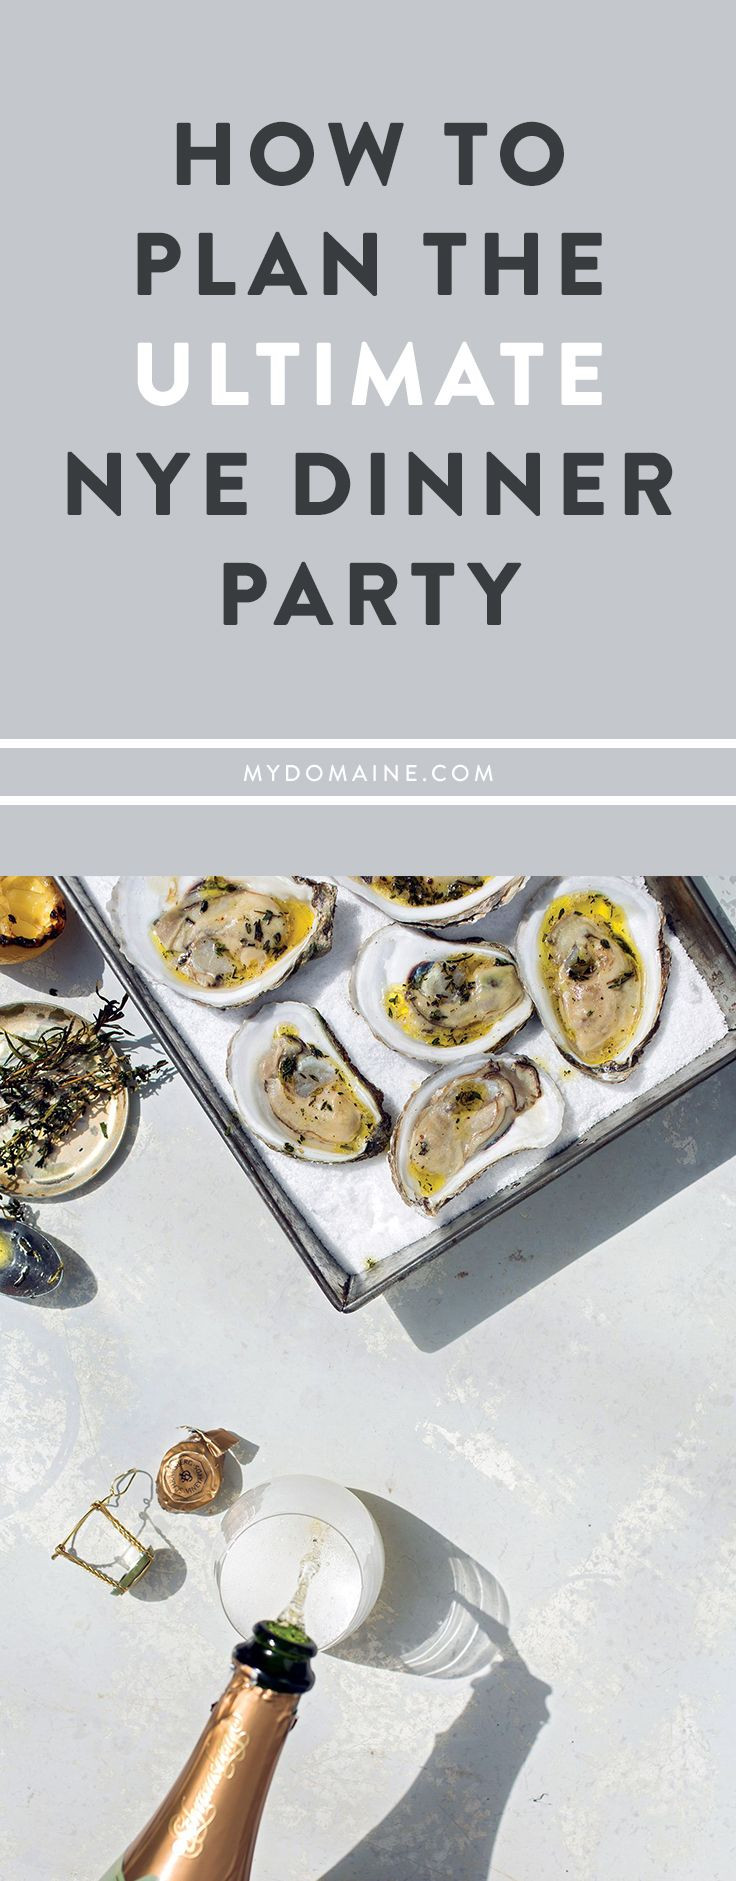 Menu Ideas For New Years Eve Dinner Party
 The Ultimate New Year’s Eve Dinner Party Plan